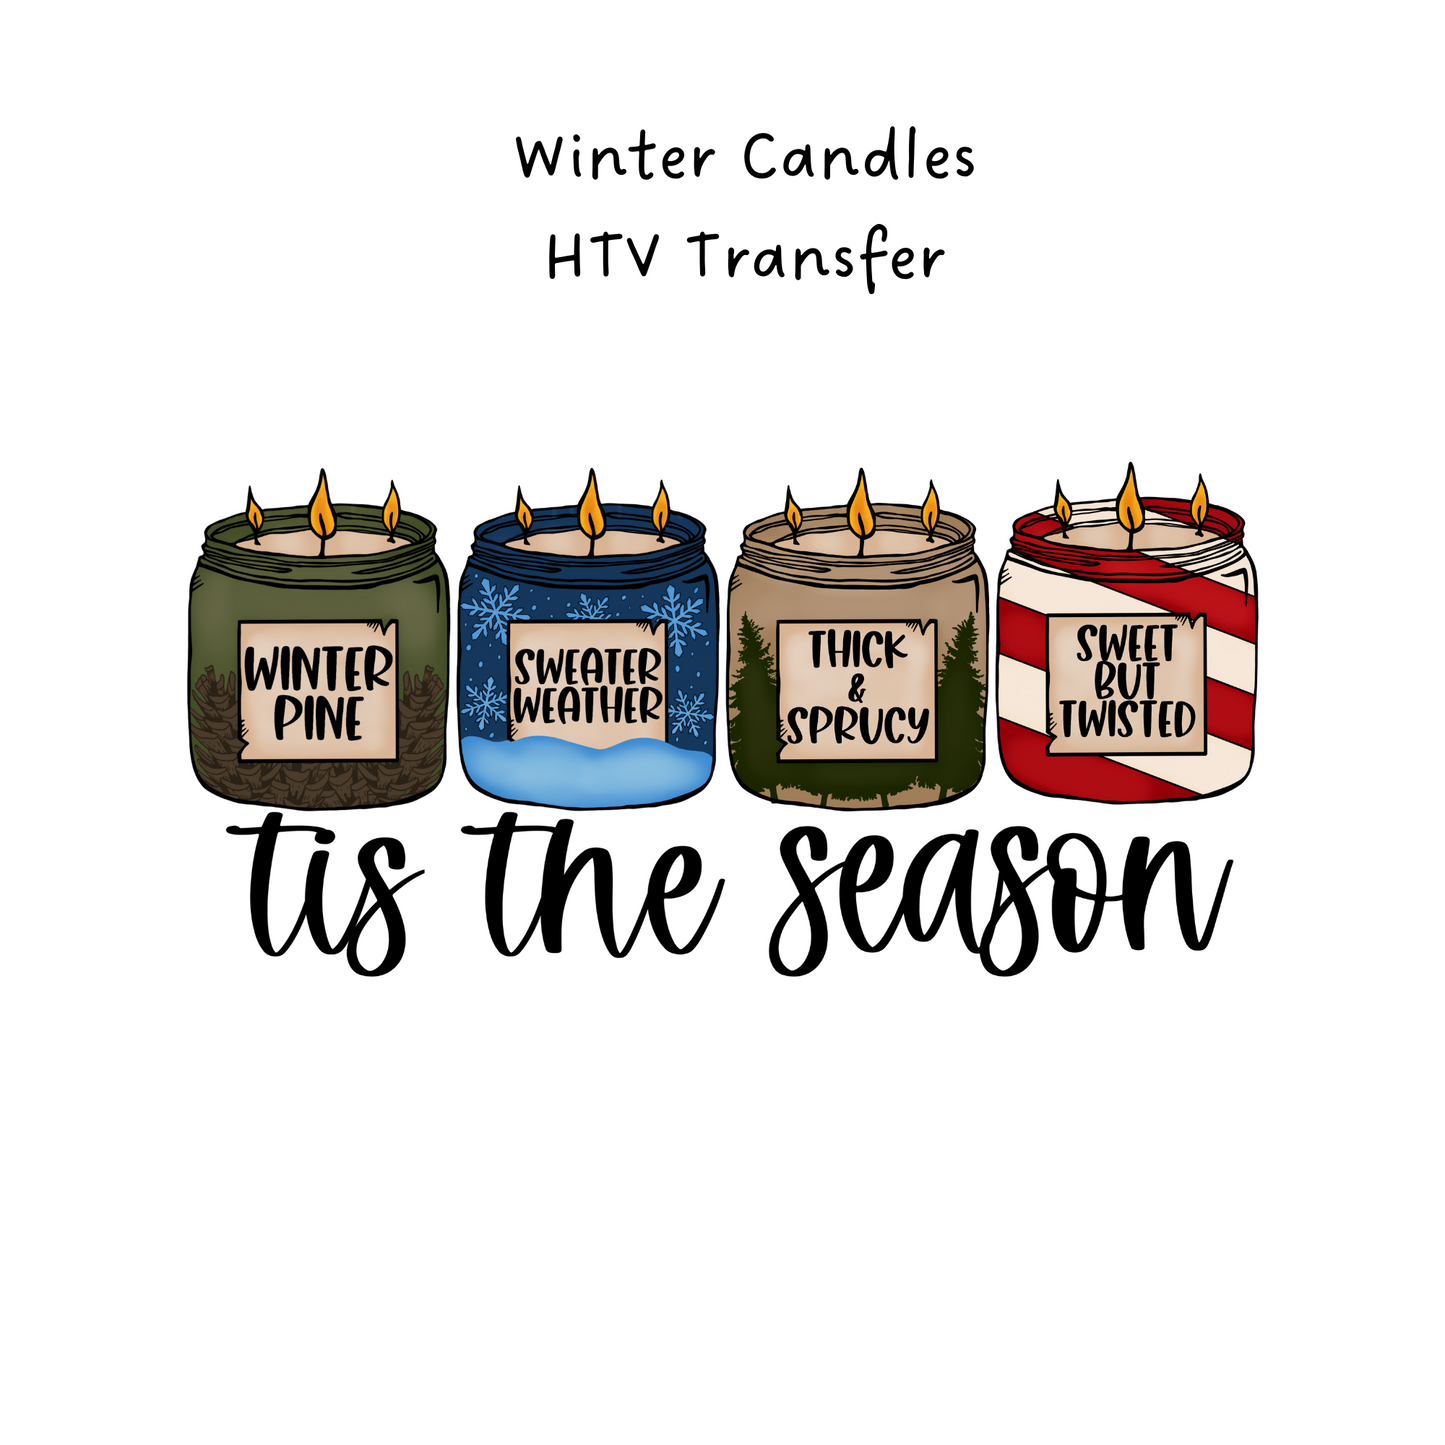 Winter Candle HTV Transfer